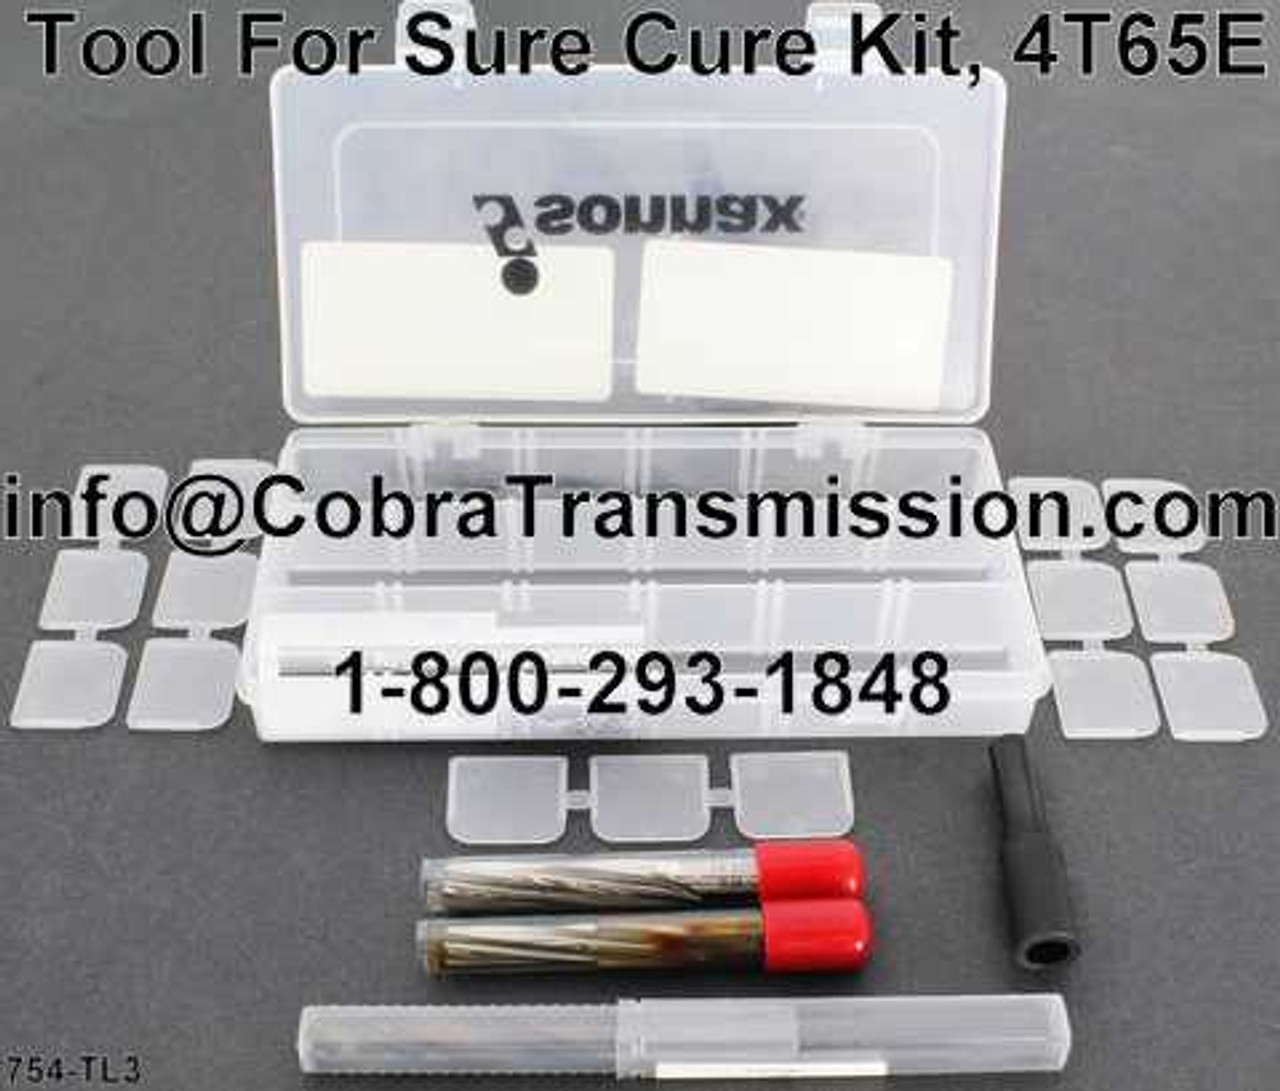 Tool For Sure Cure Kit, 4T65E